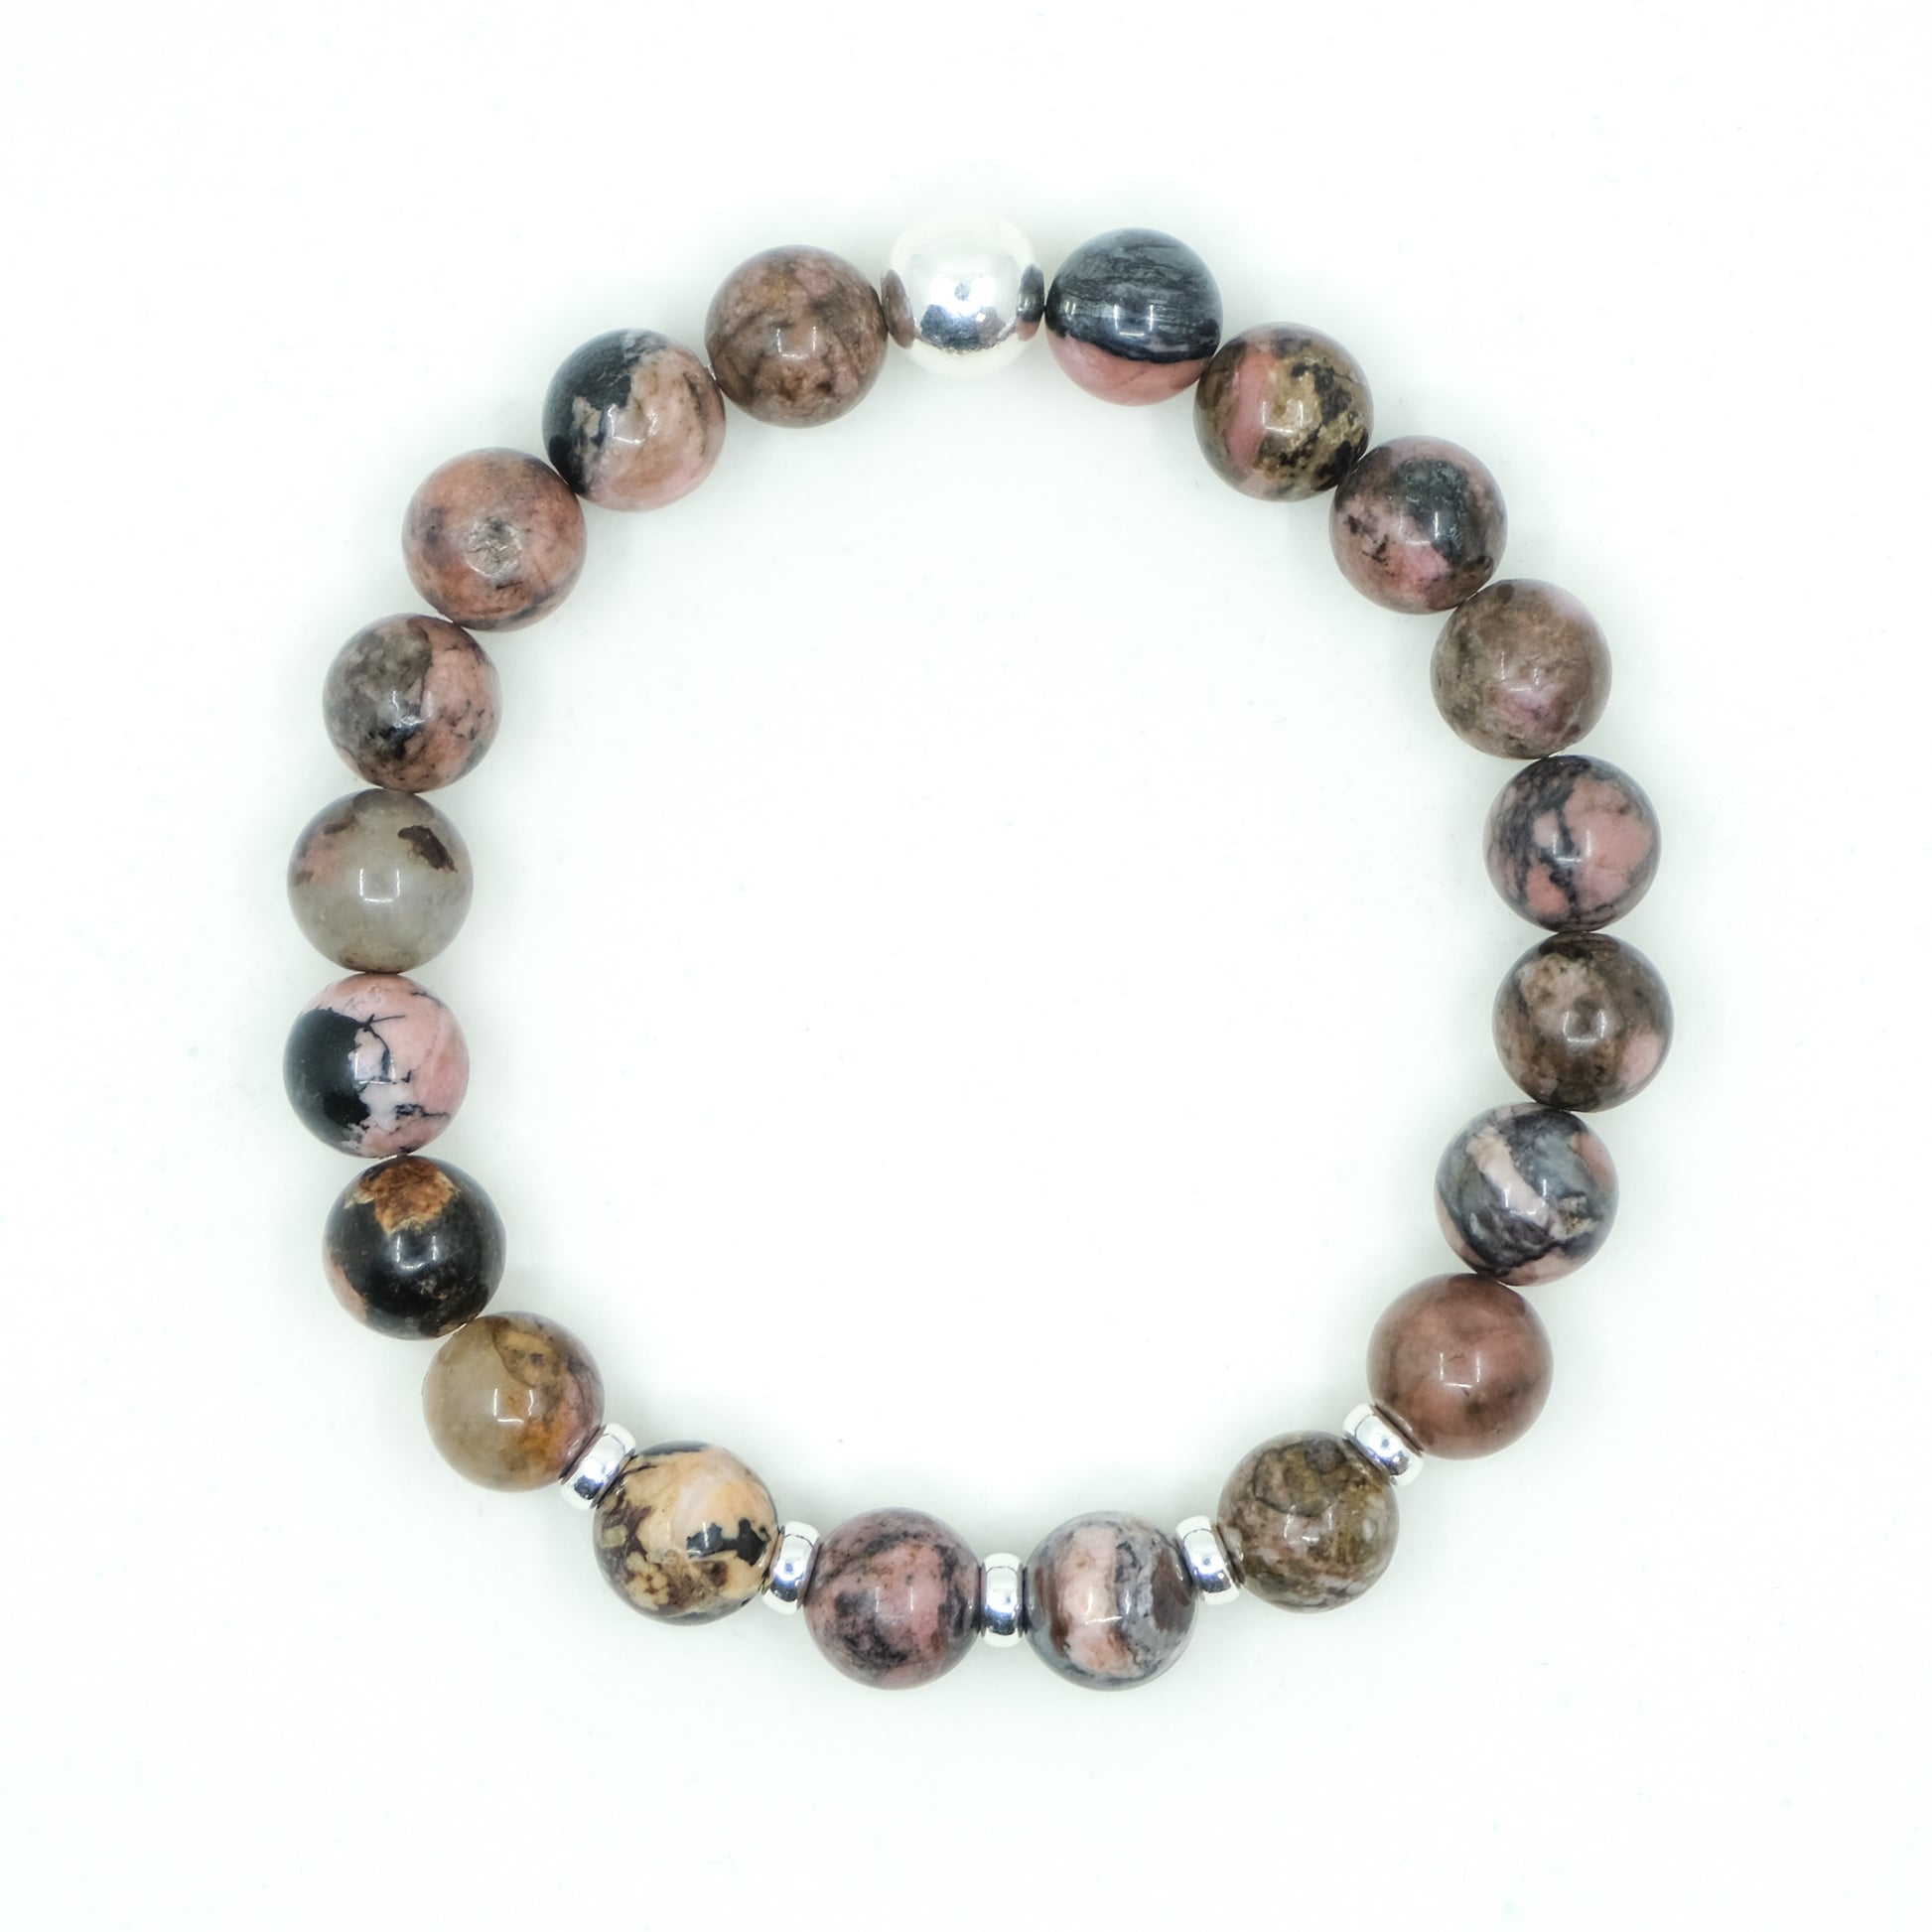 8mm rhodonite bracelet with 925 silver accessories from above